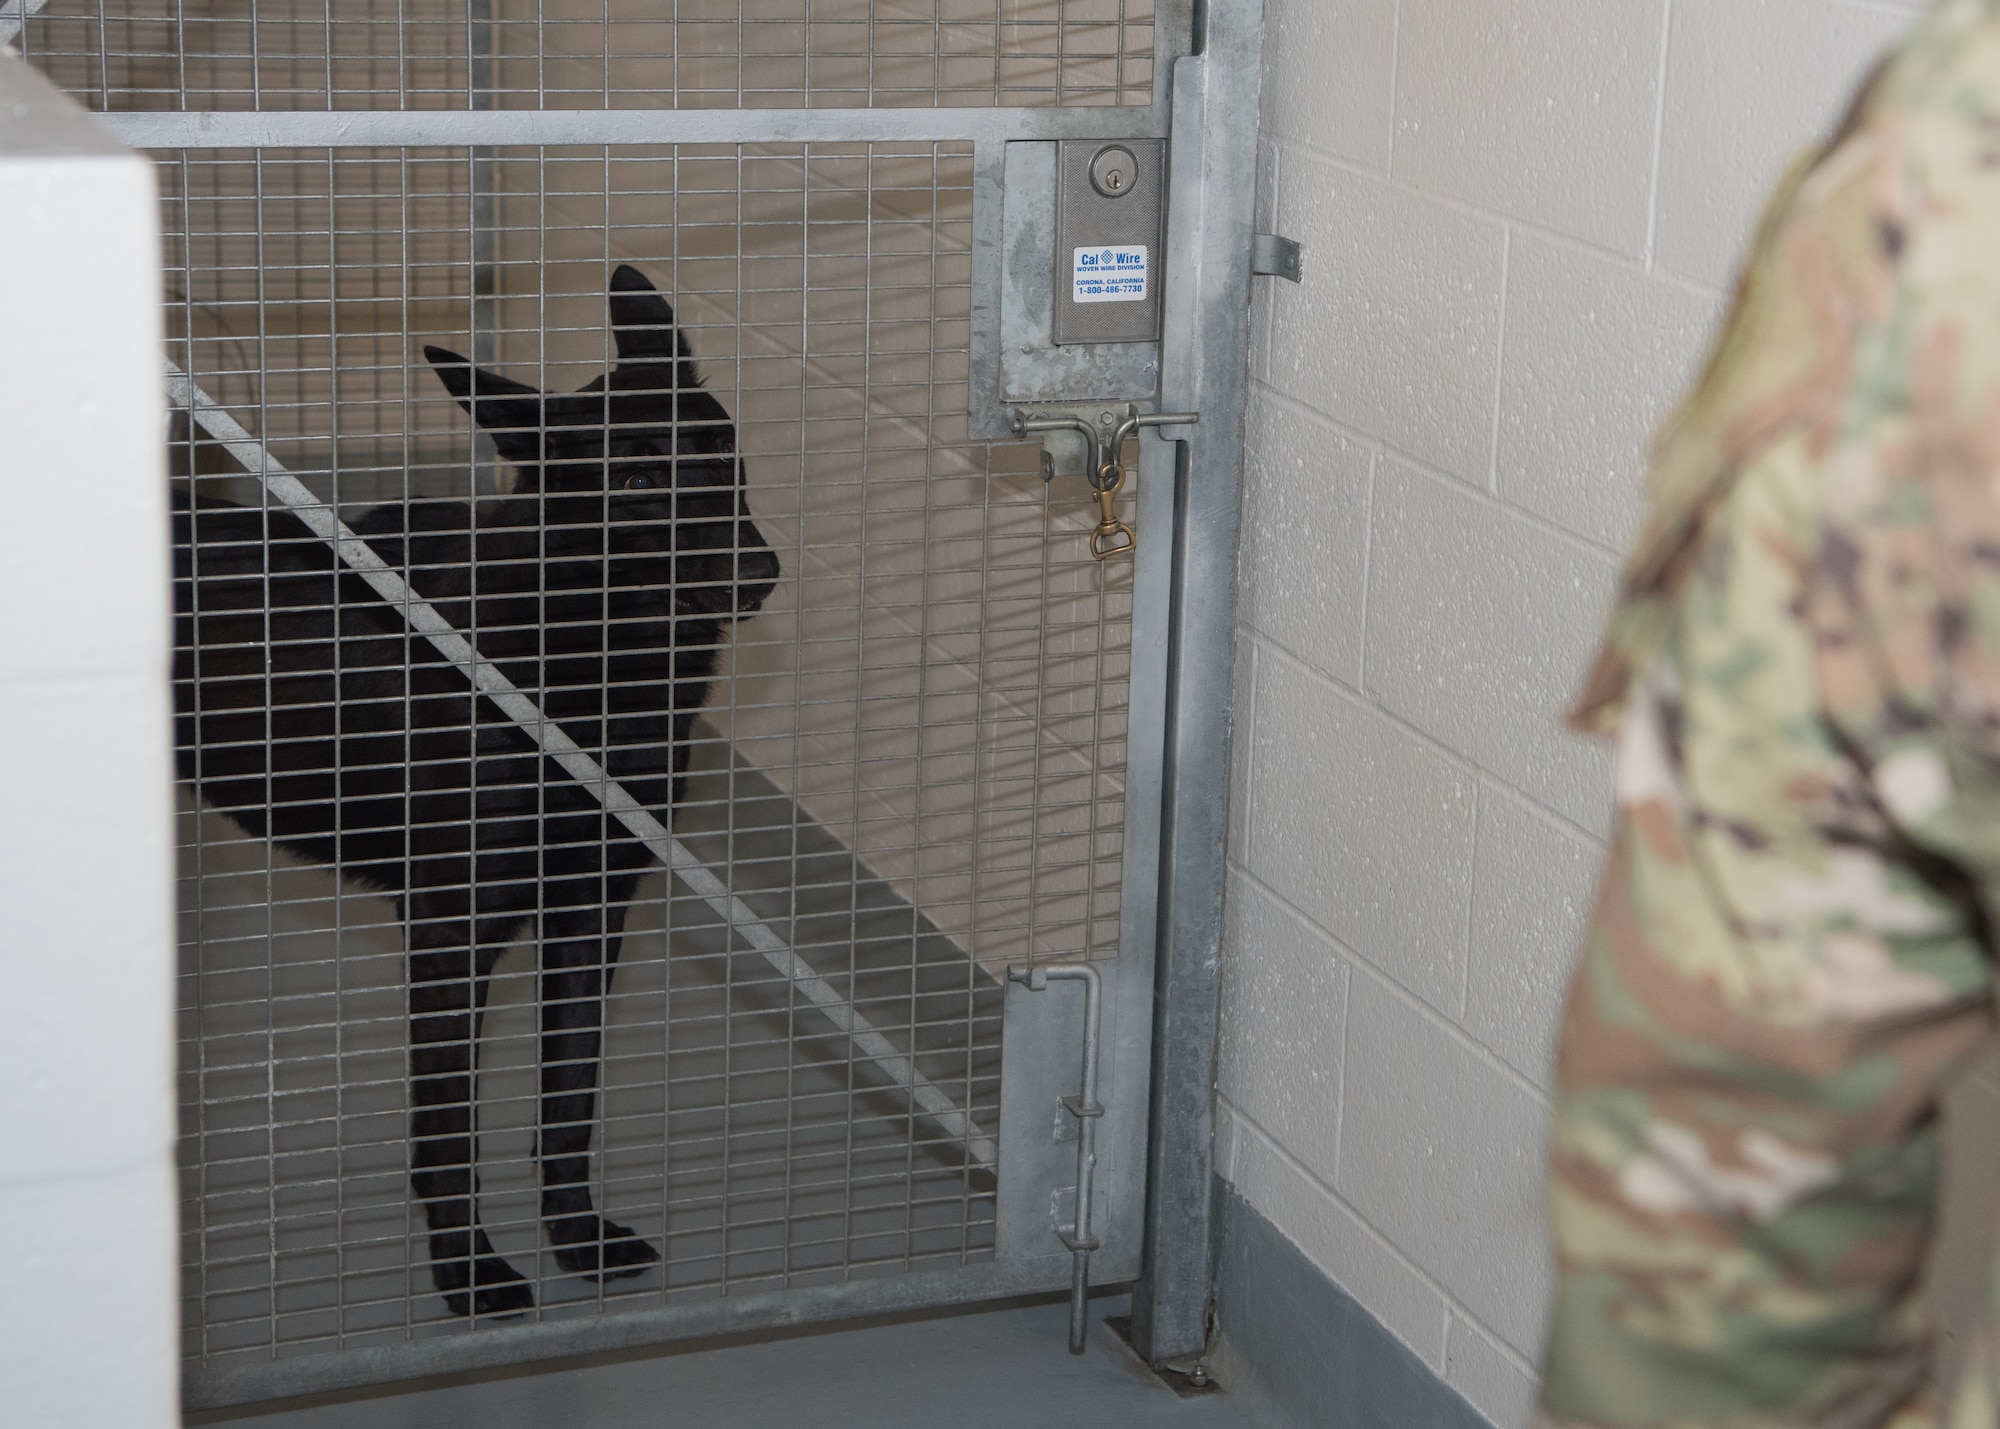 A military working dog stands in the kennels behind a gate.